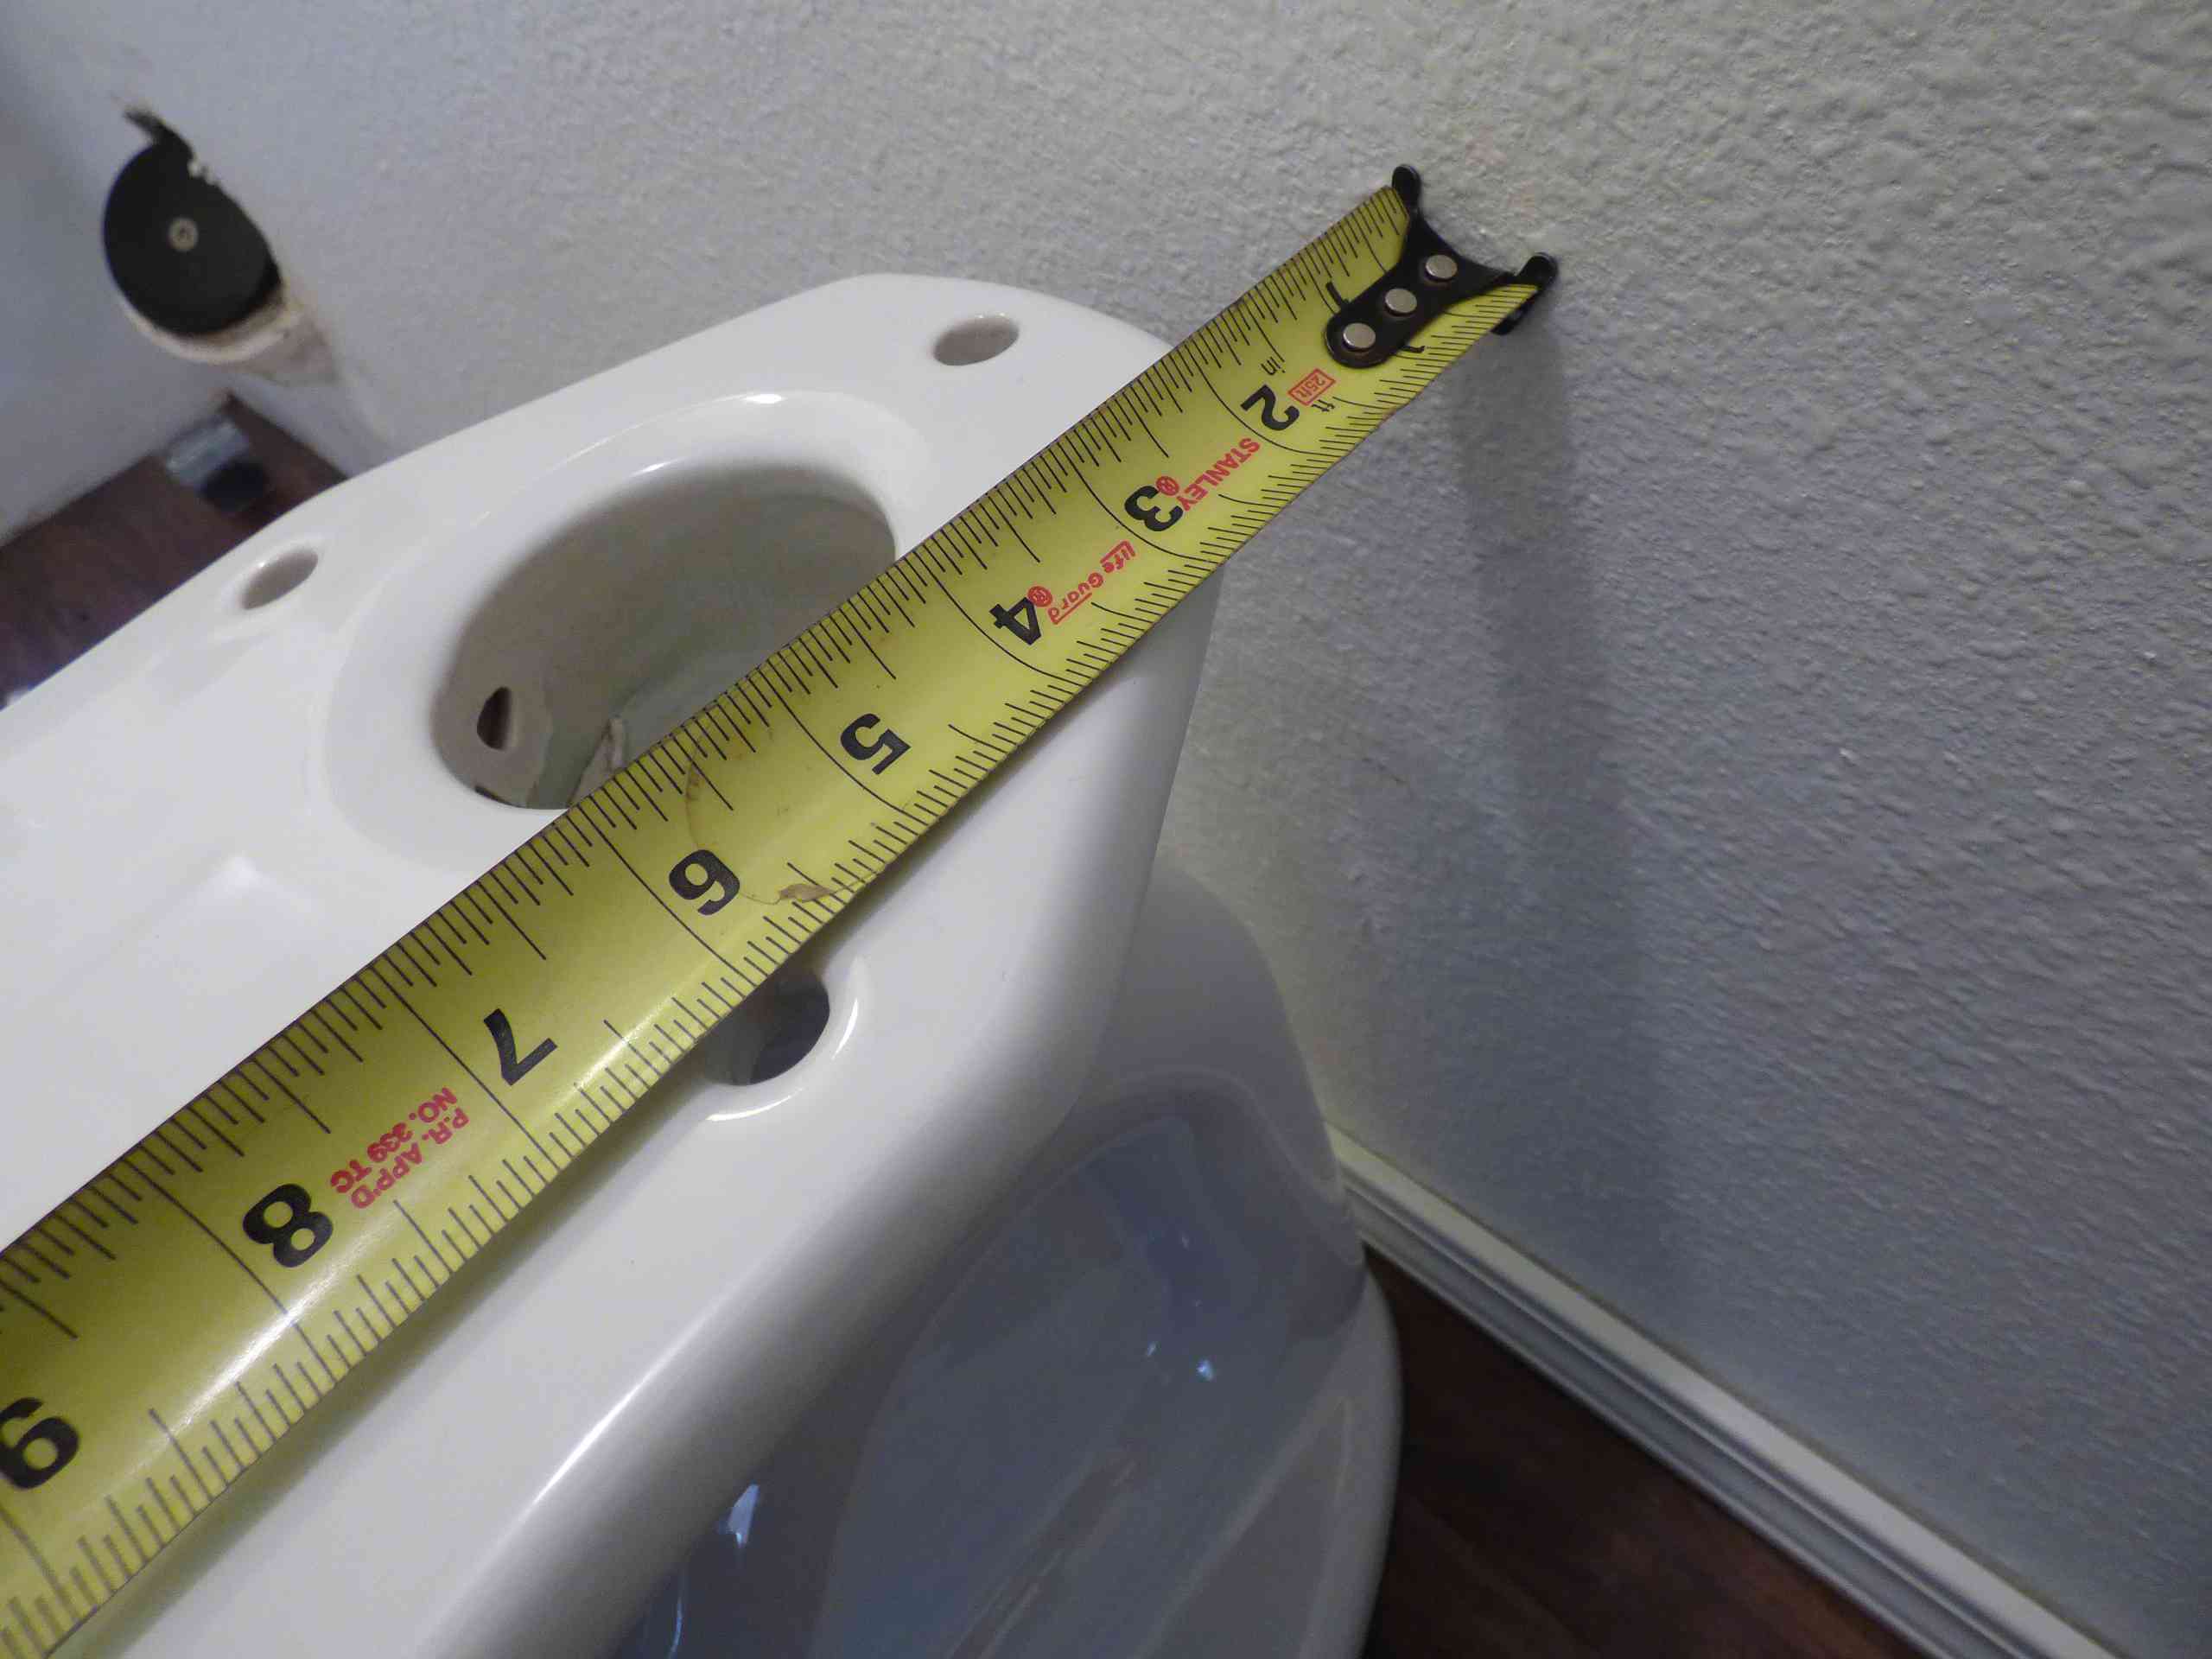 Making This Mass Market Toilet a Little Easier To Install